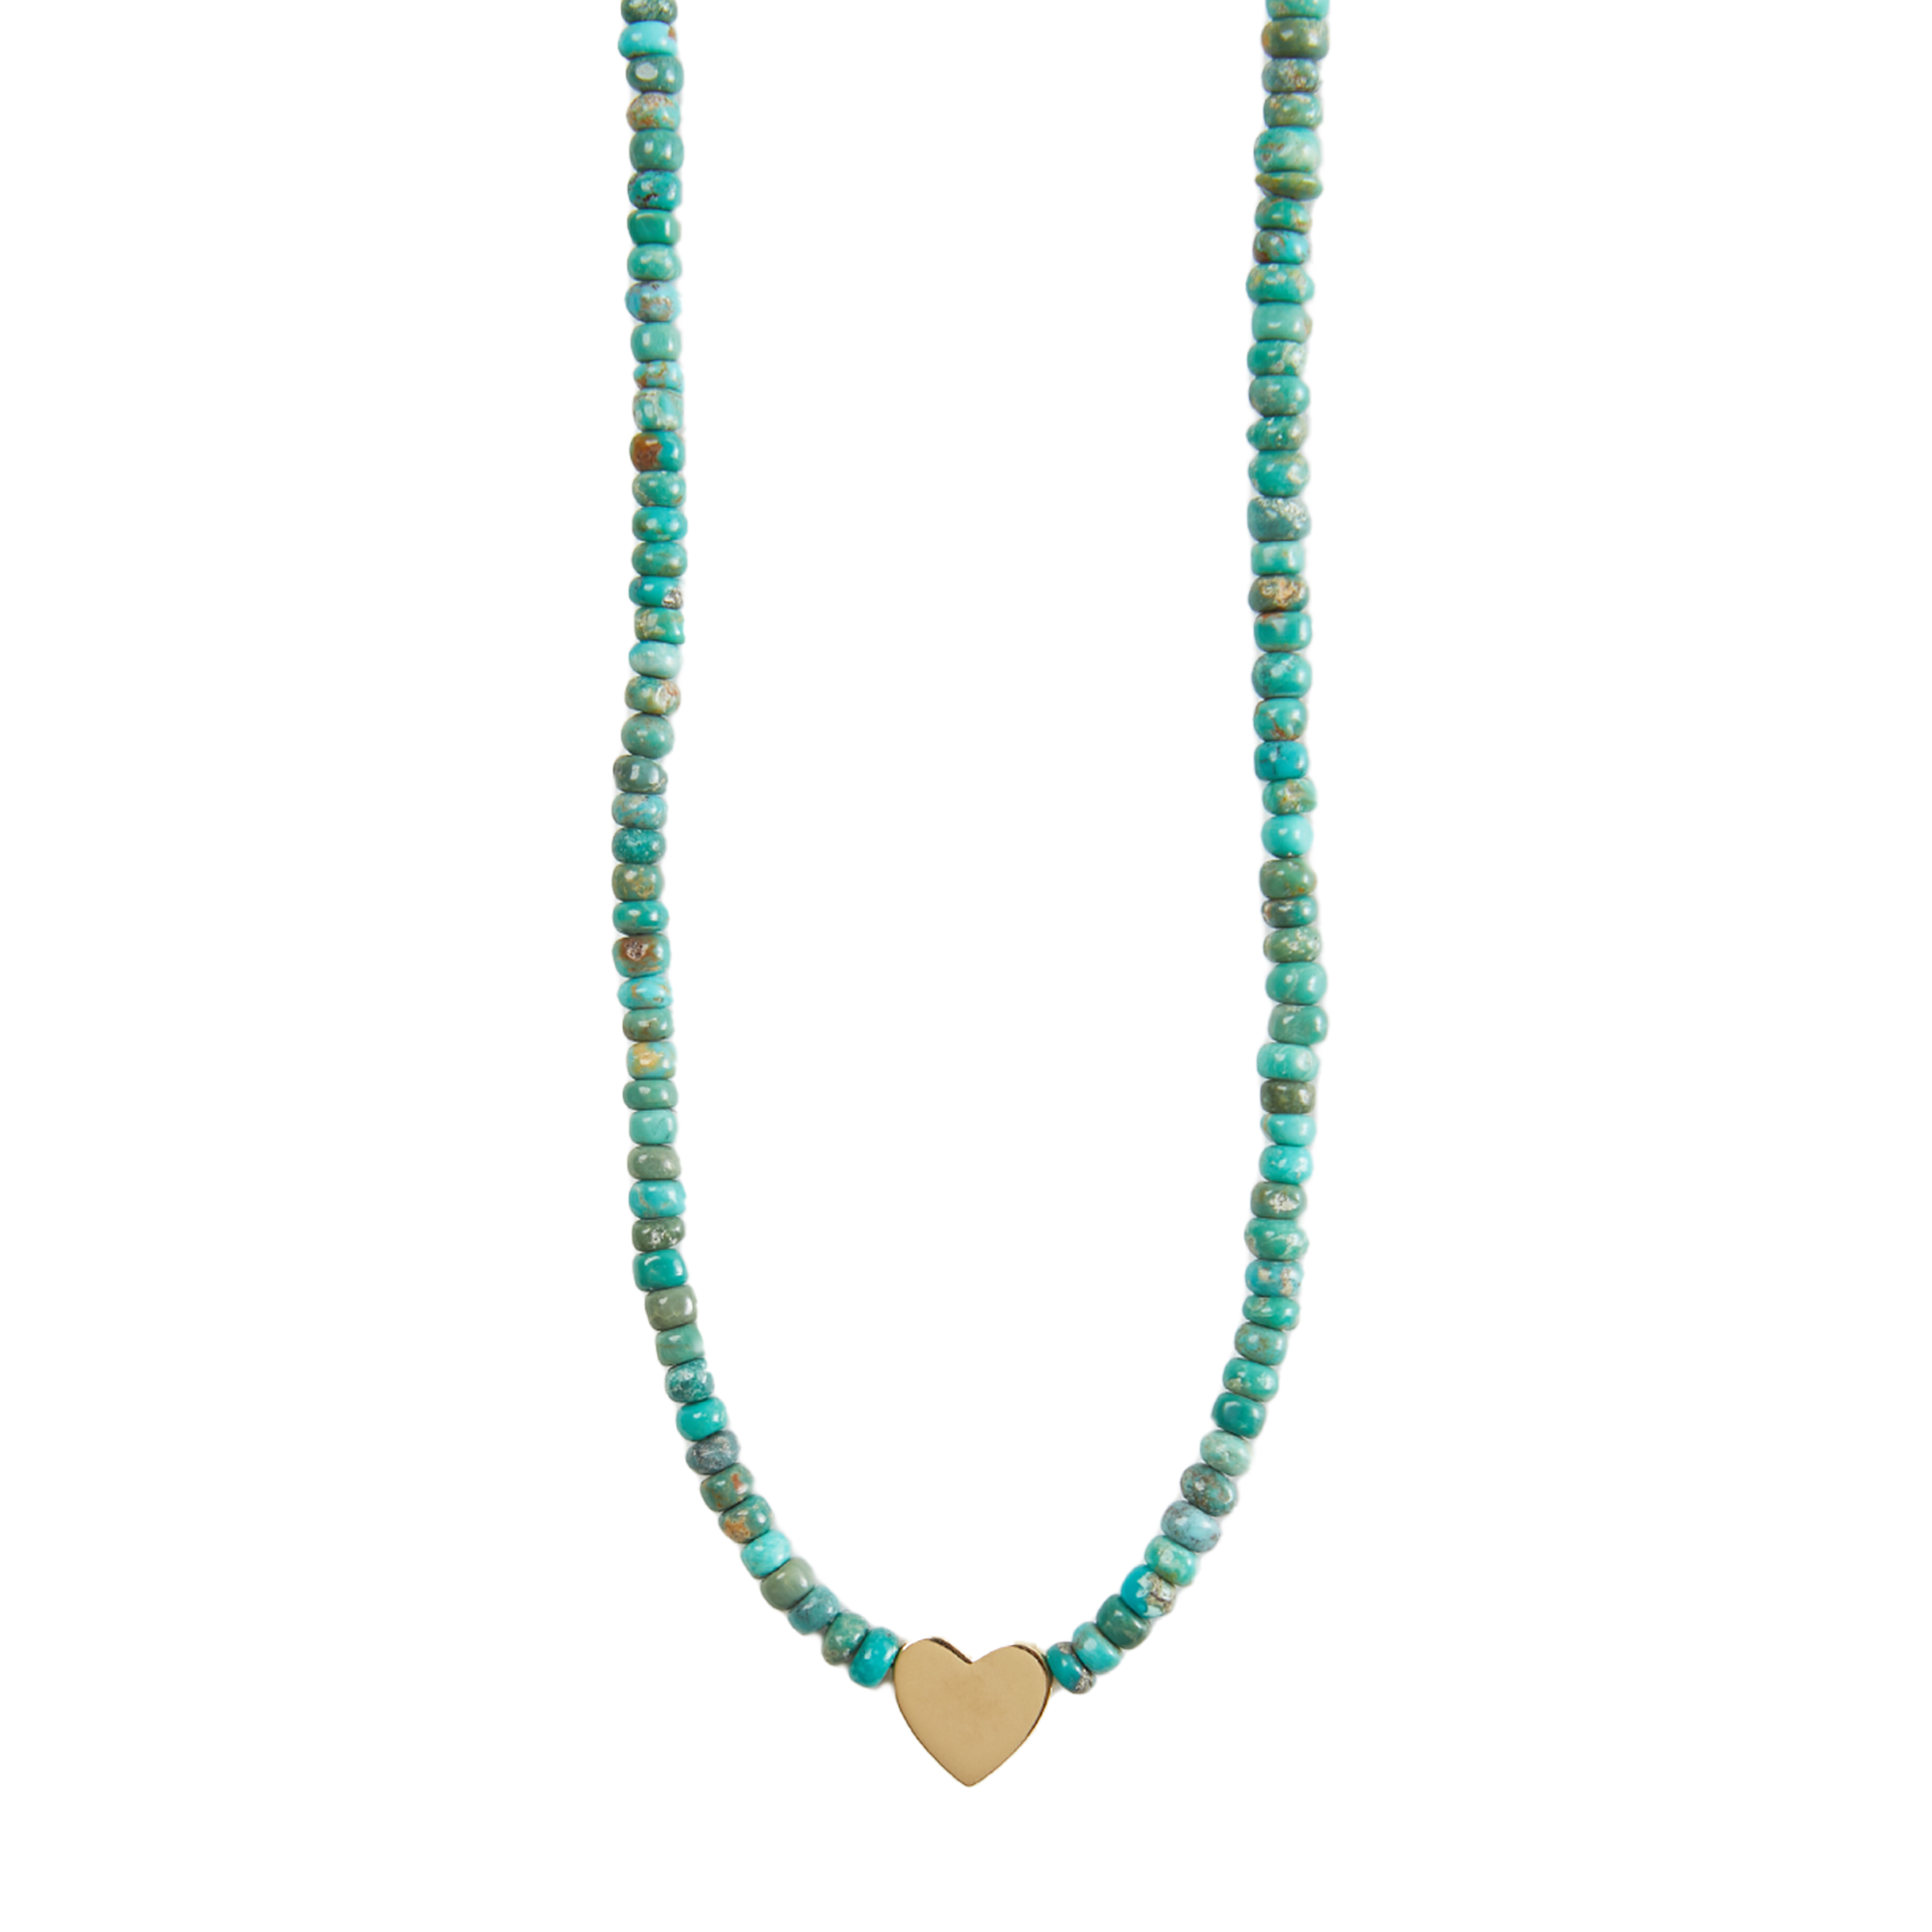 THE JULIA NECKLACE